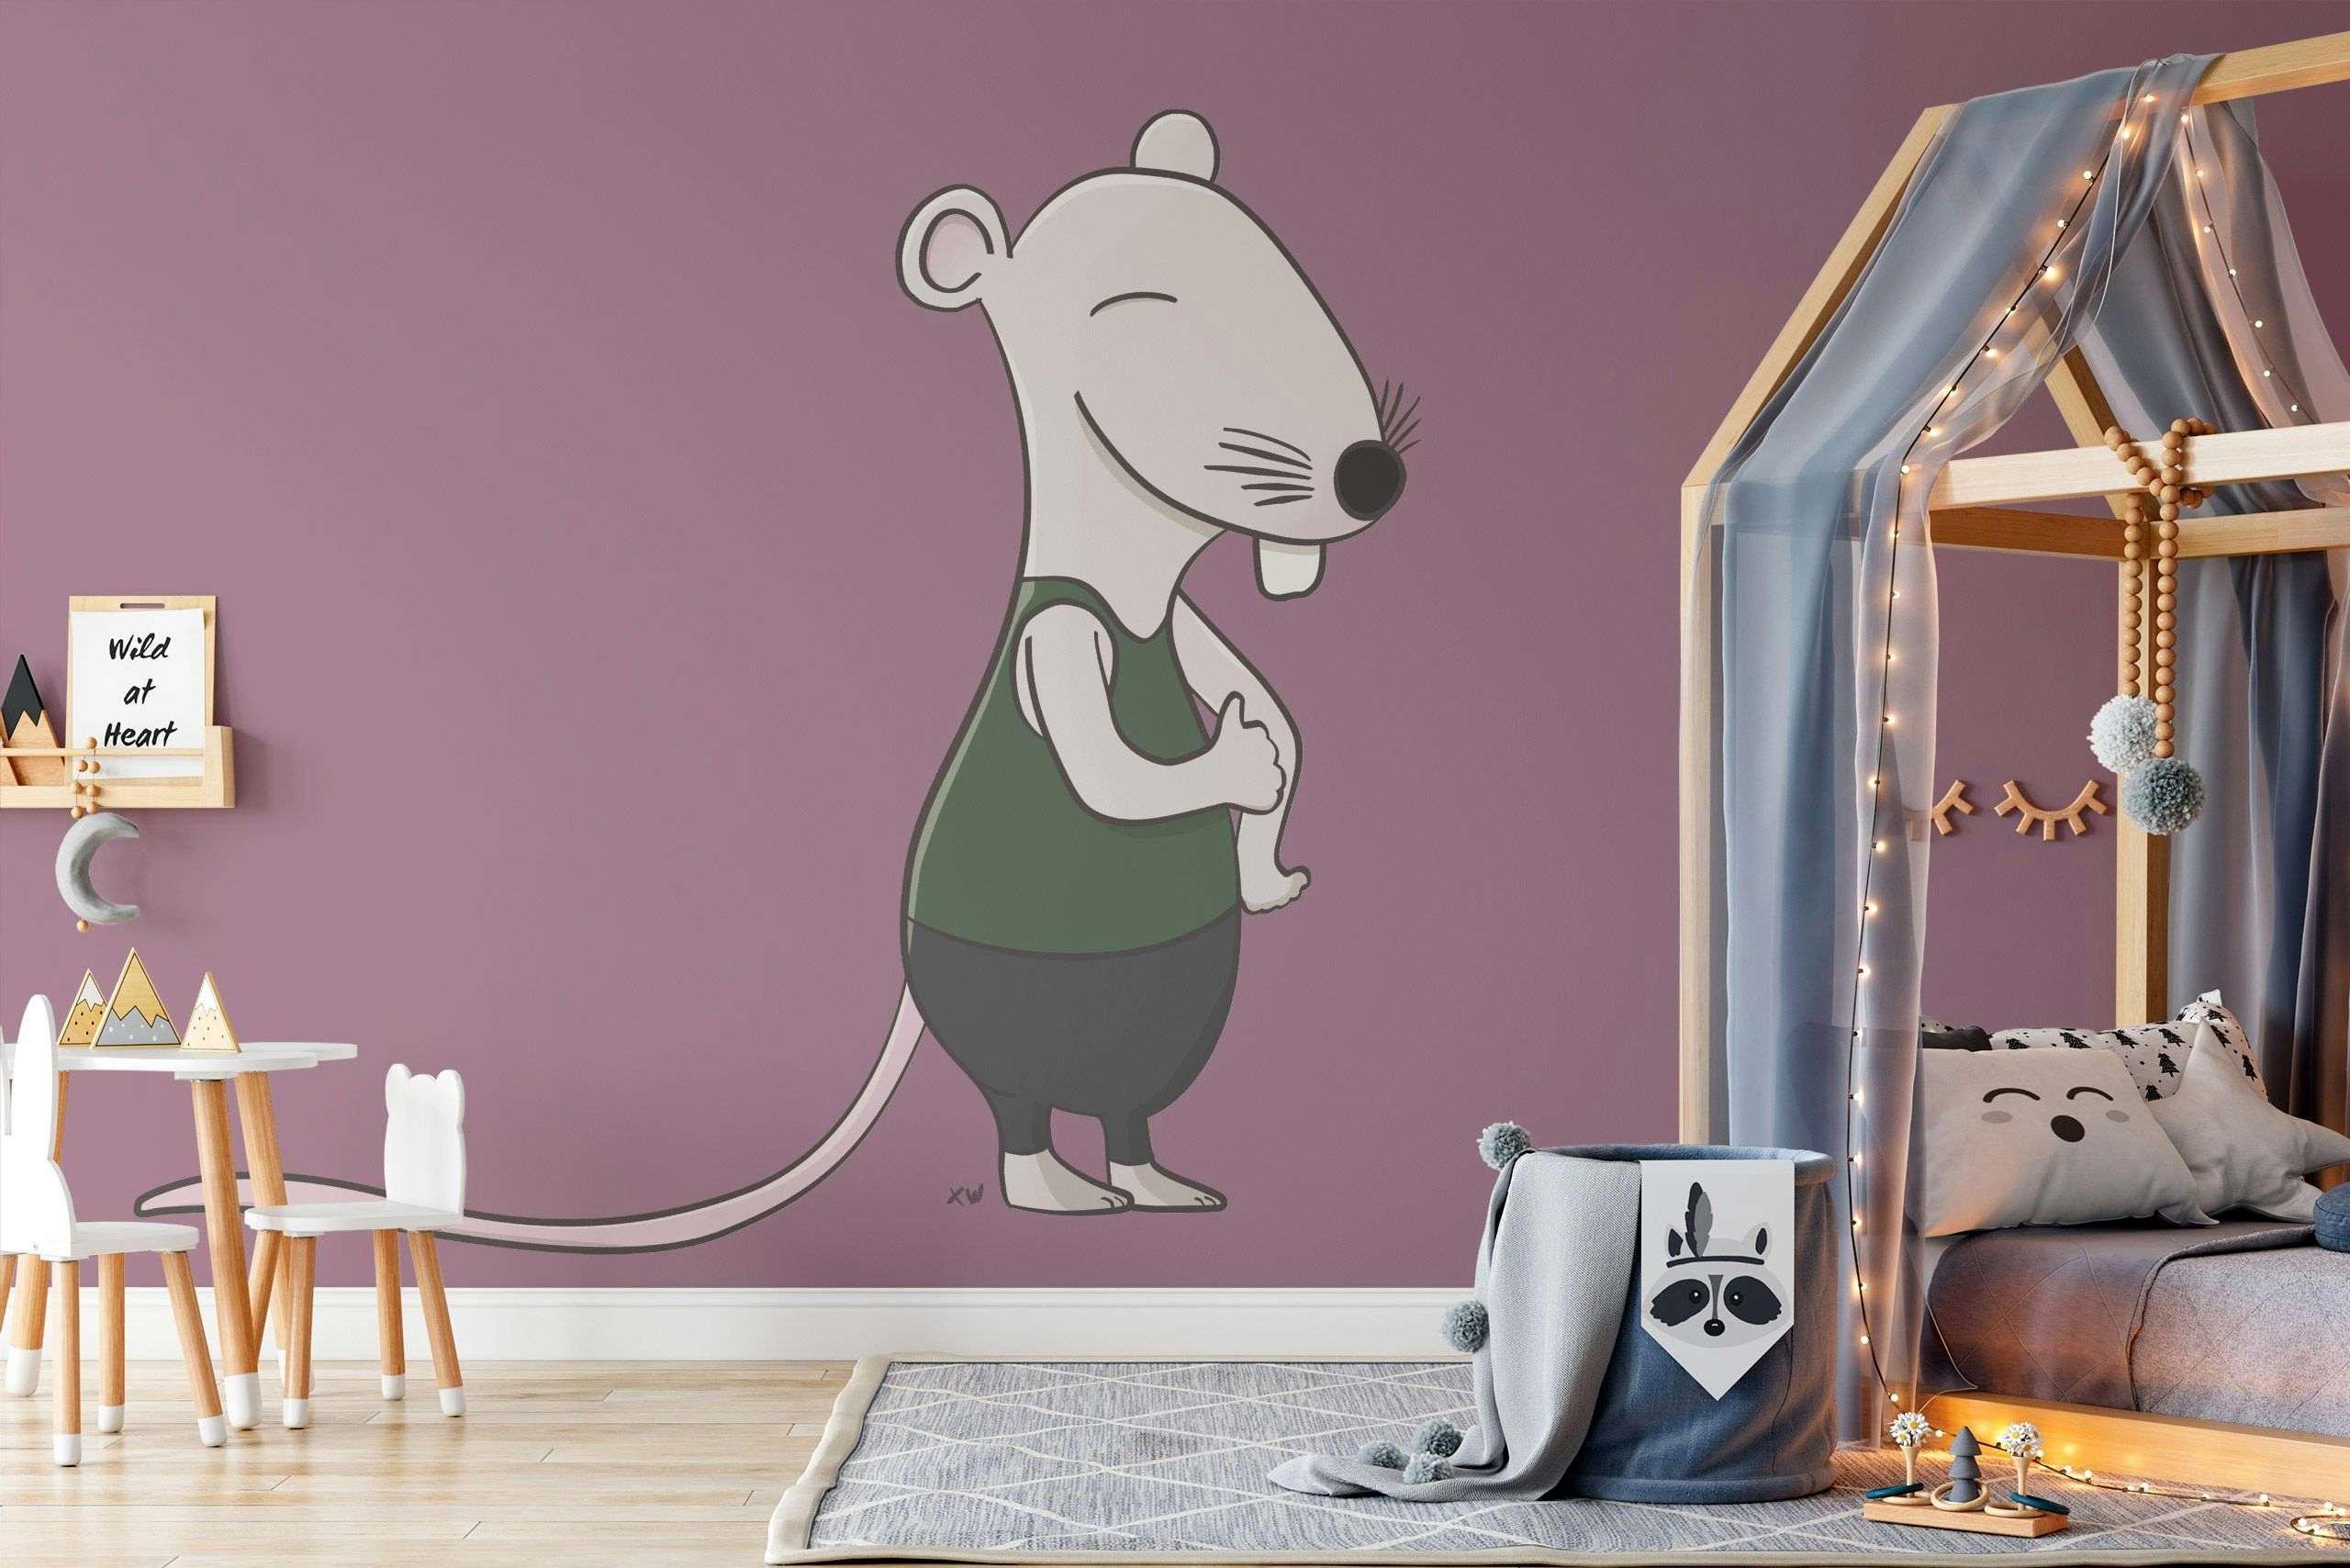 Friendly cartoon rat wall mural by Xavier Wendling,available on Society6.